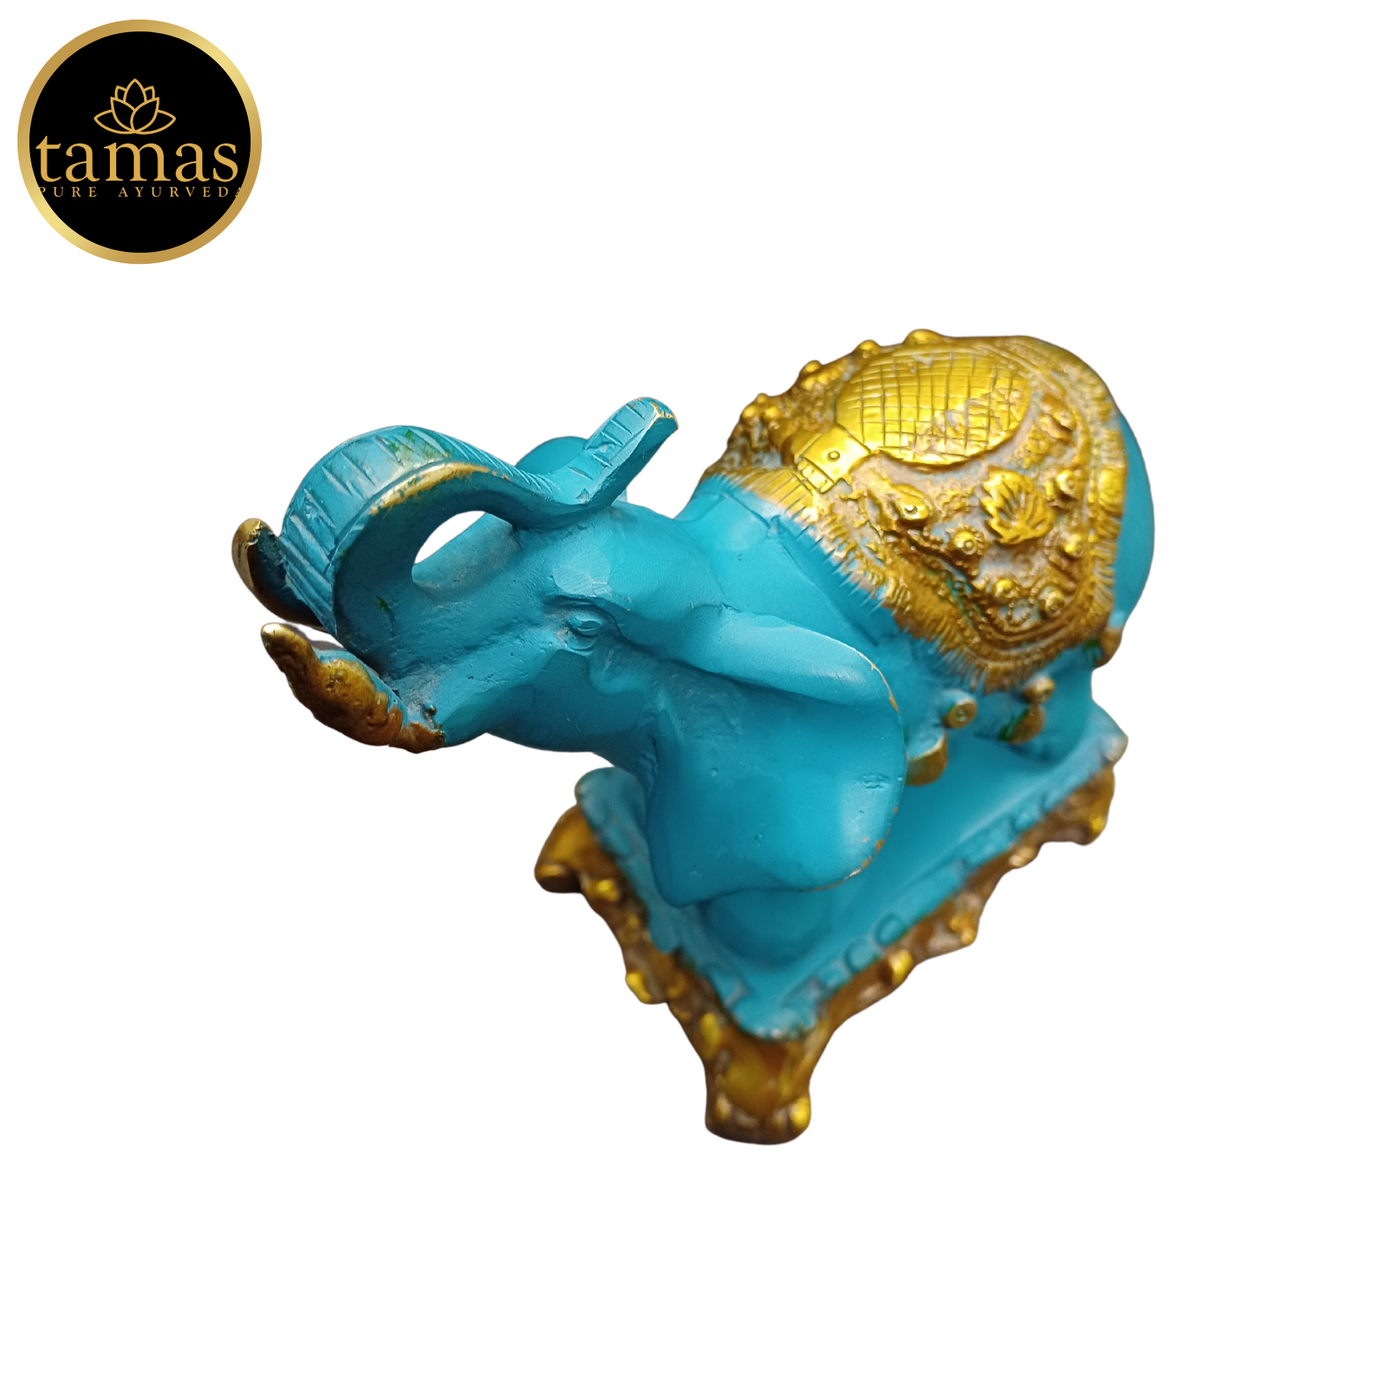 Tamas Brass Handcrafted Ethnic Elephant Showpiece Trunk Up Statue / Idol with Antique Finish   (6.5 x 3.5 x 6.5 Inches, Golden & Blue) (Pack of 1)